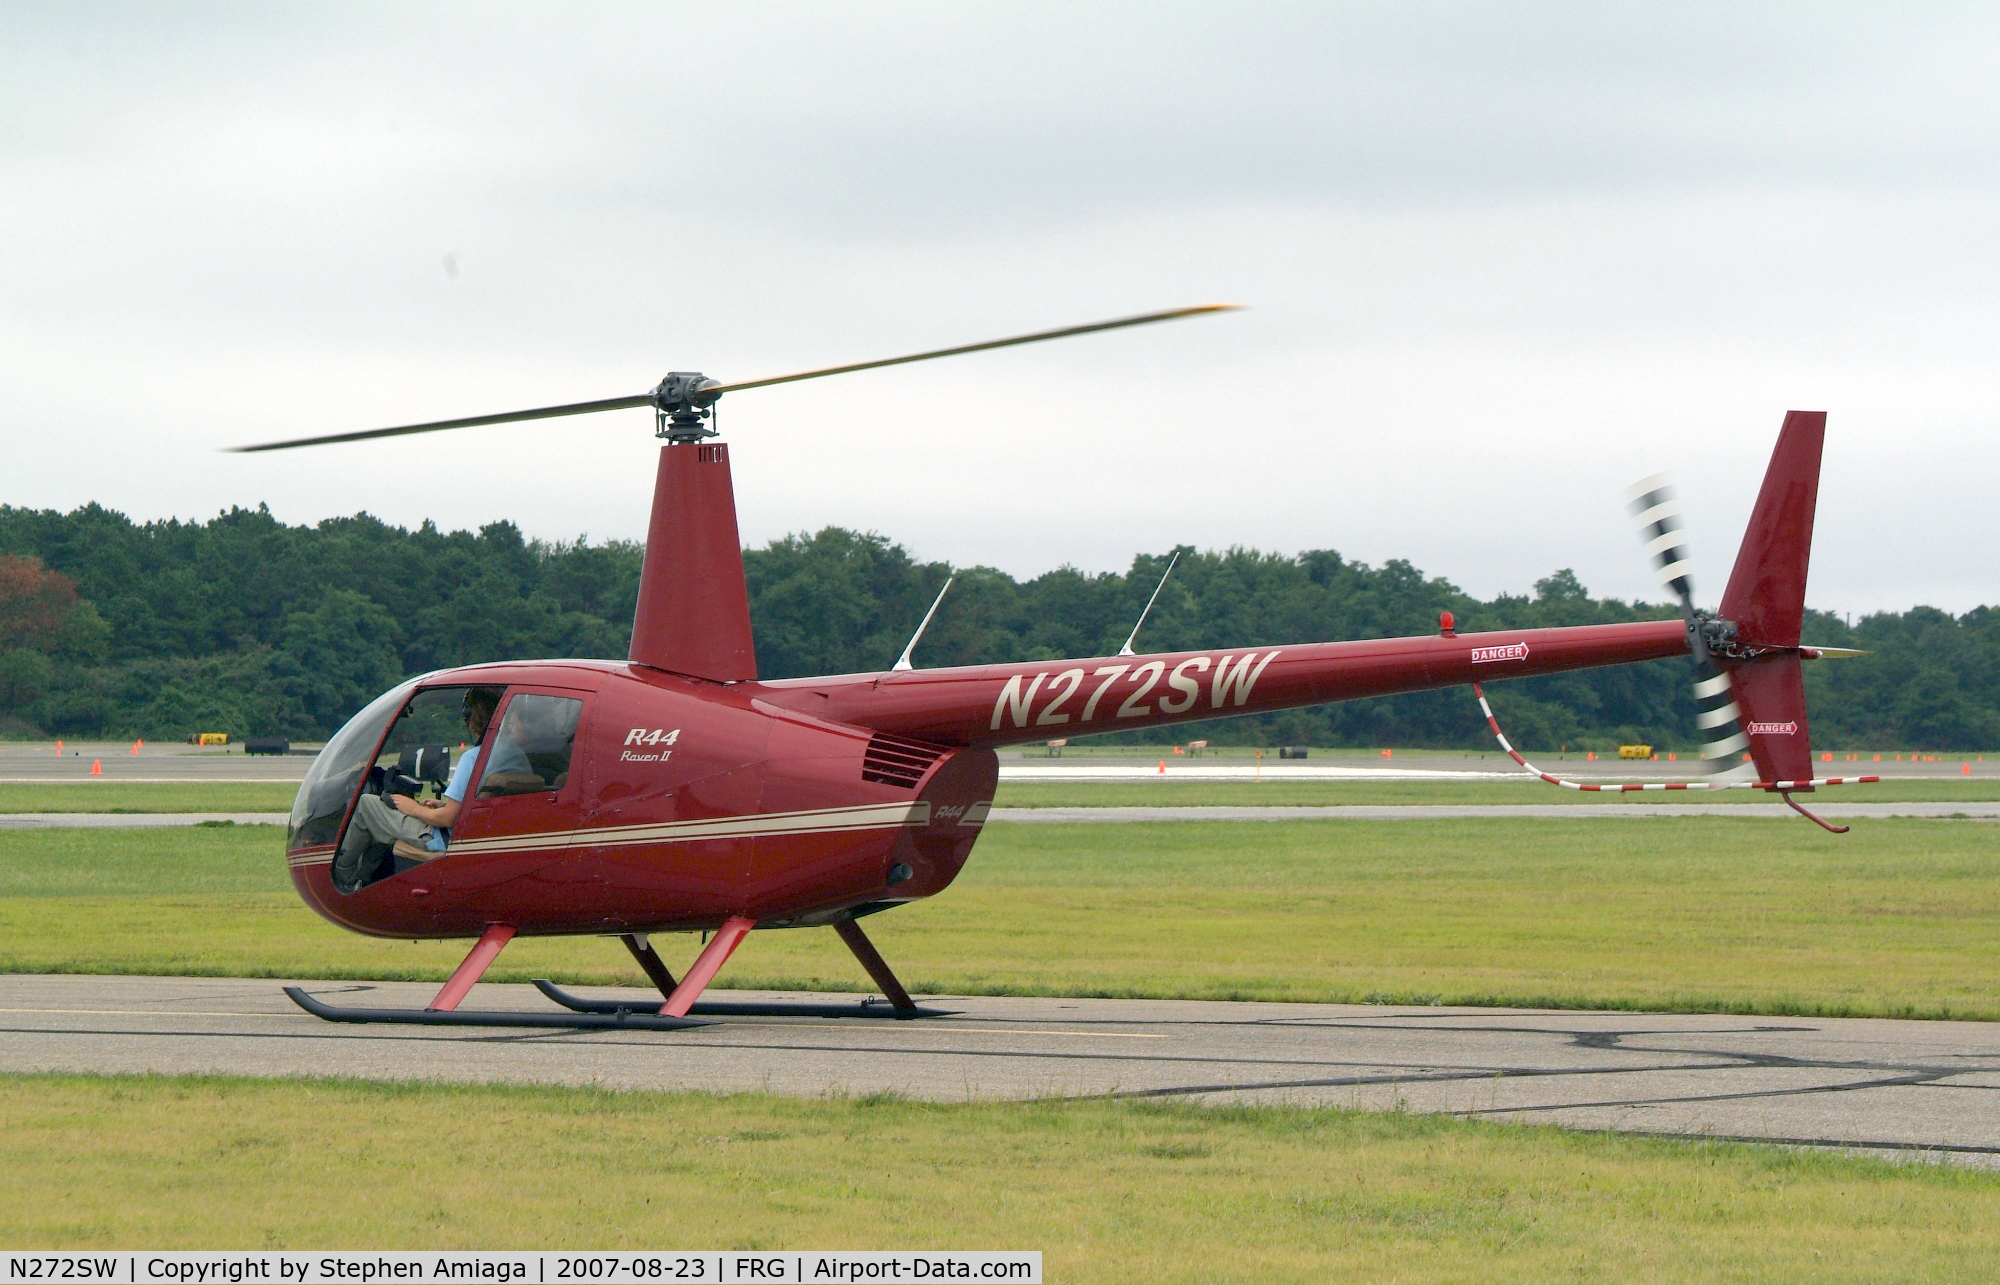 N272SW, 2005 Robinson R44 II C/N 10817, R-44 At the show heading outr for a ride.